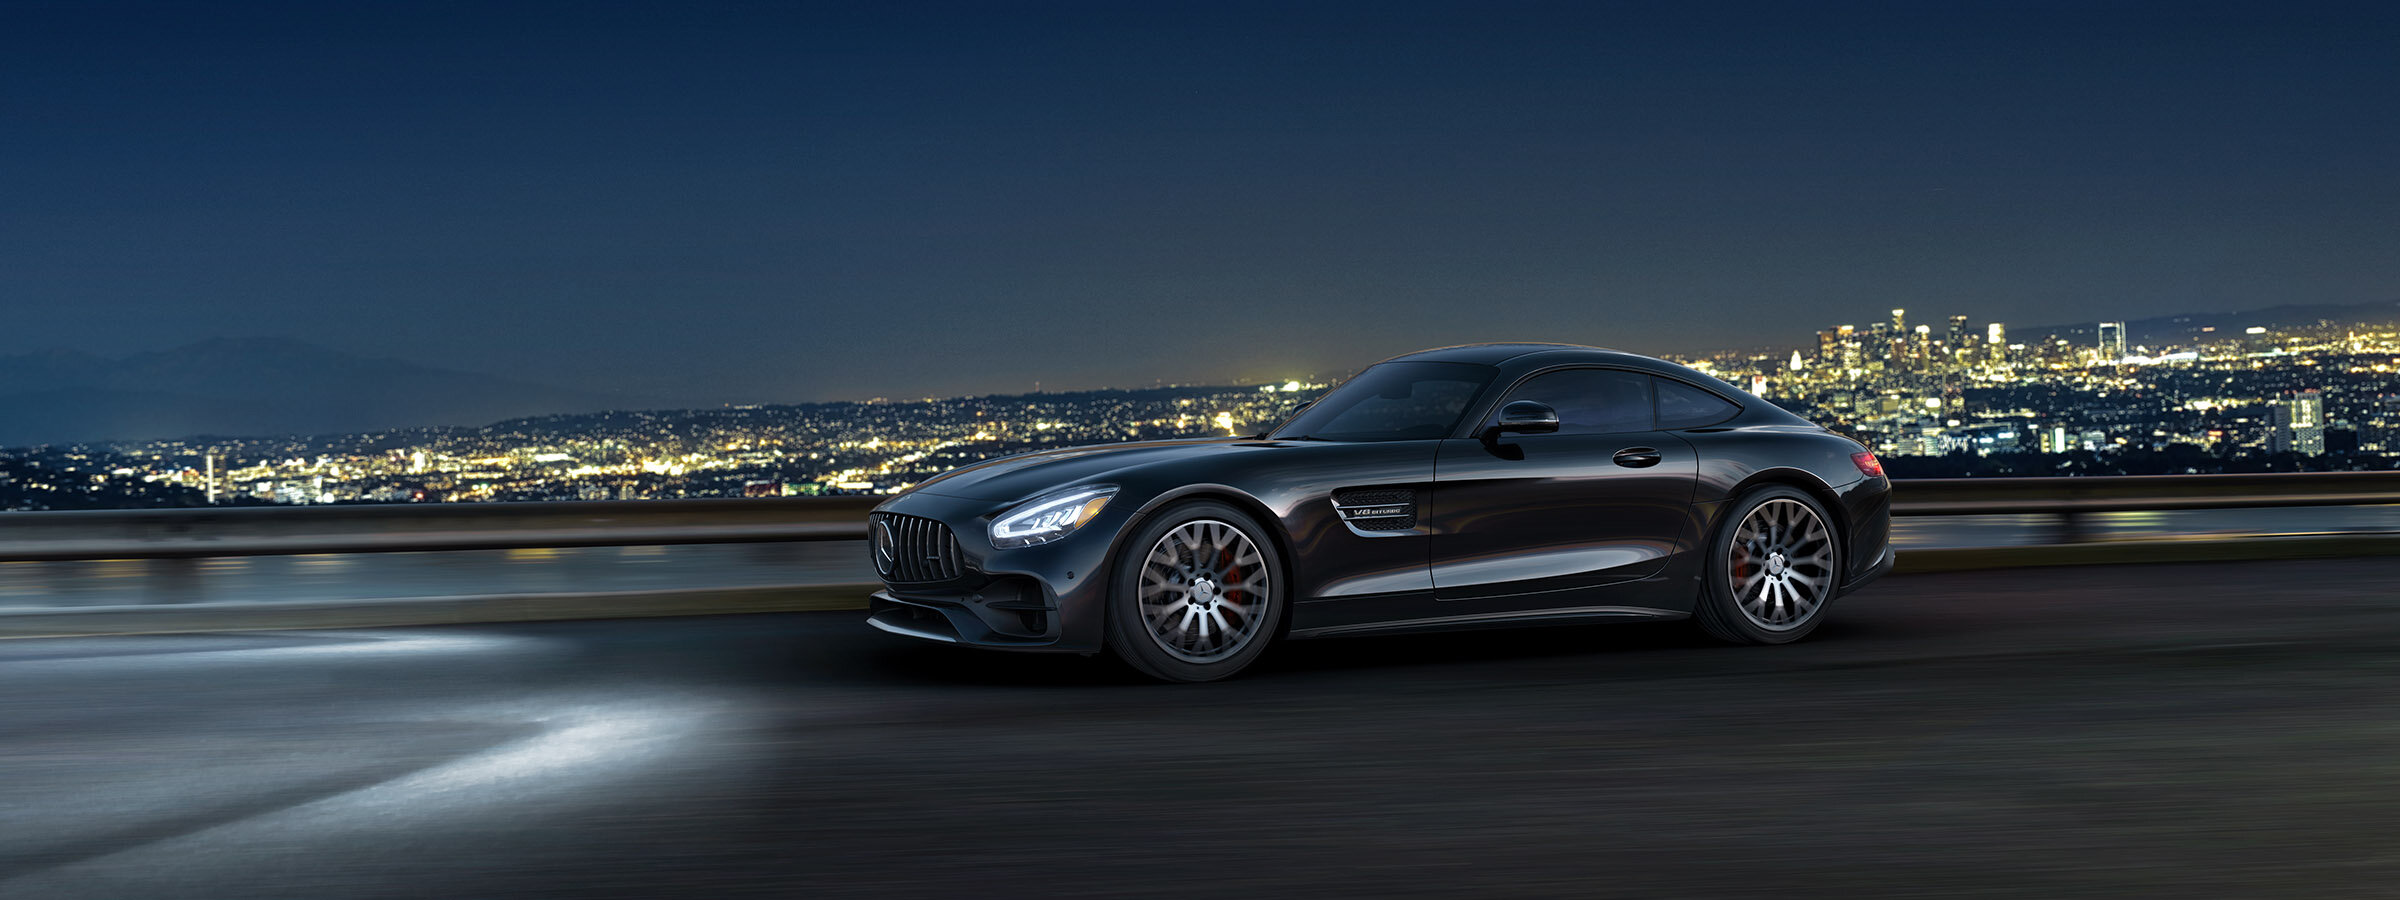 Come to Mercedes-Benz of Westminster's website and explore our Mercedes-Benz GT Class inventory.